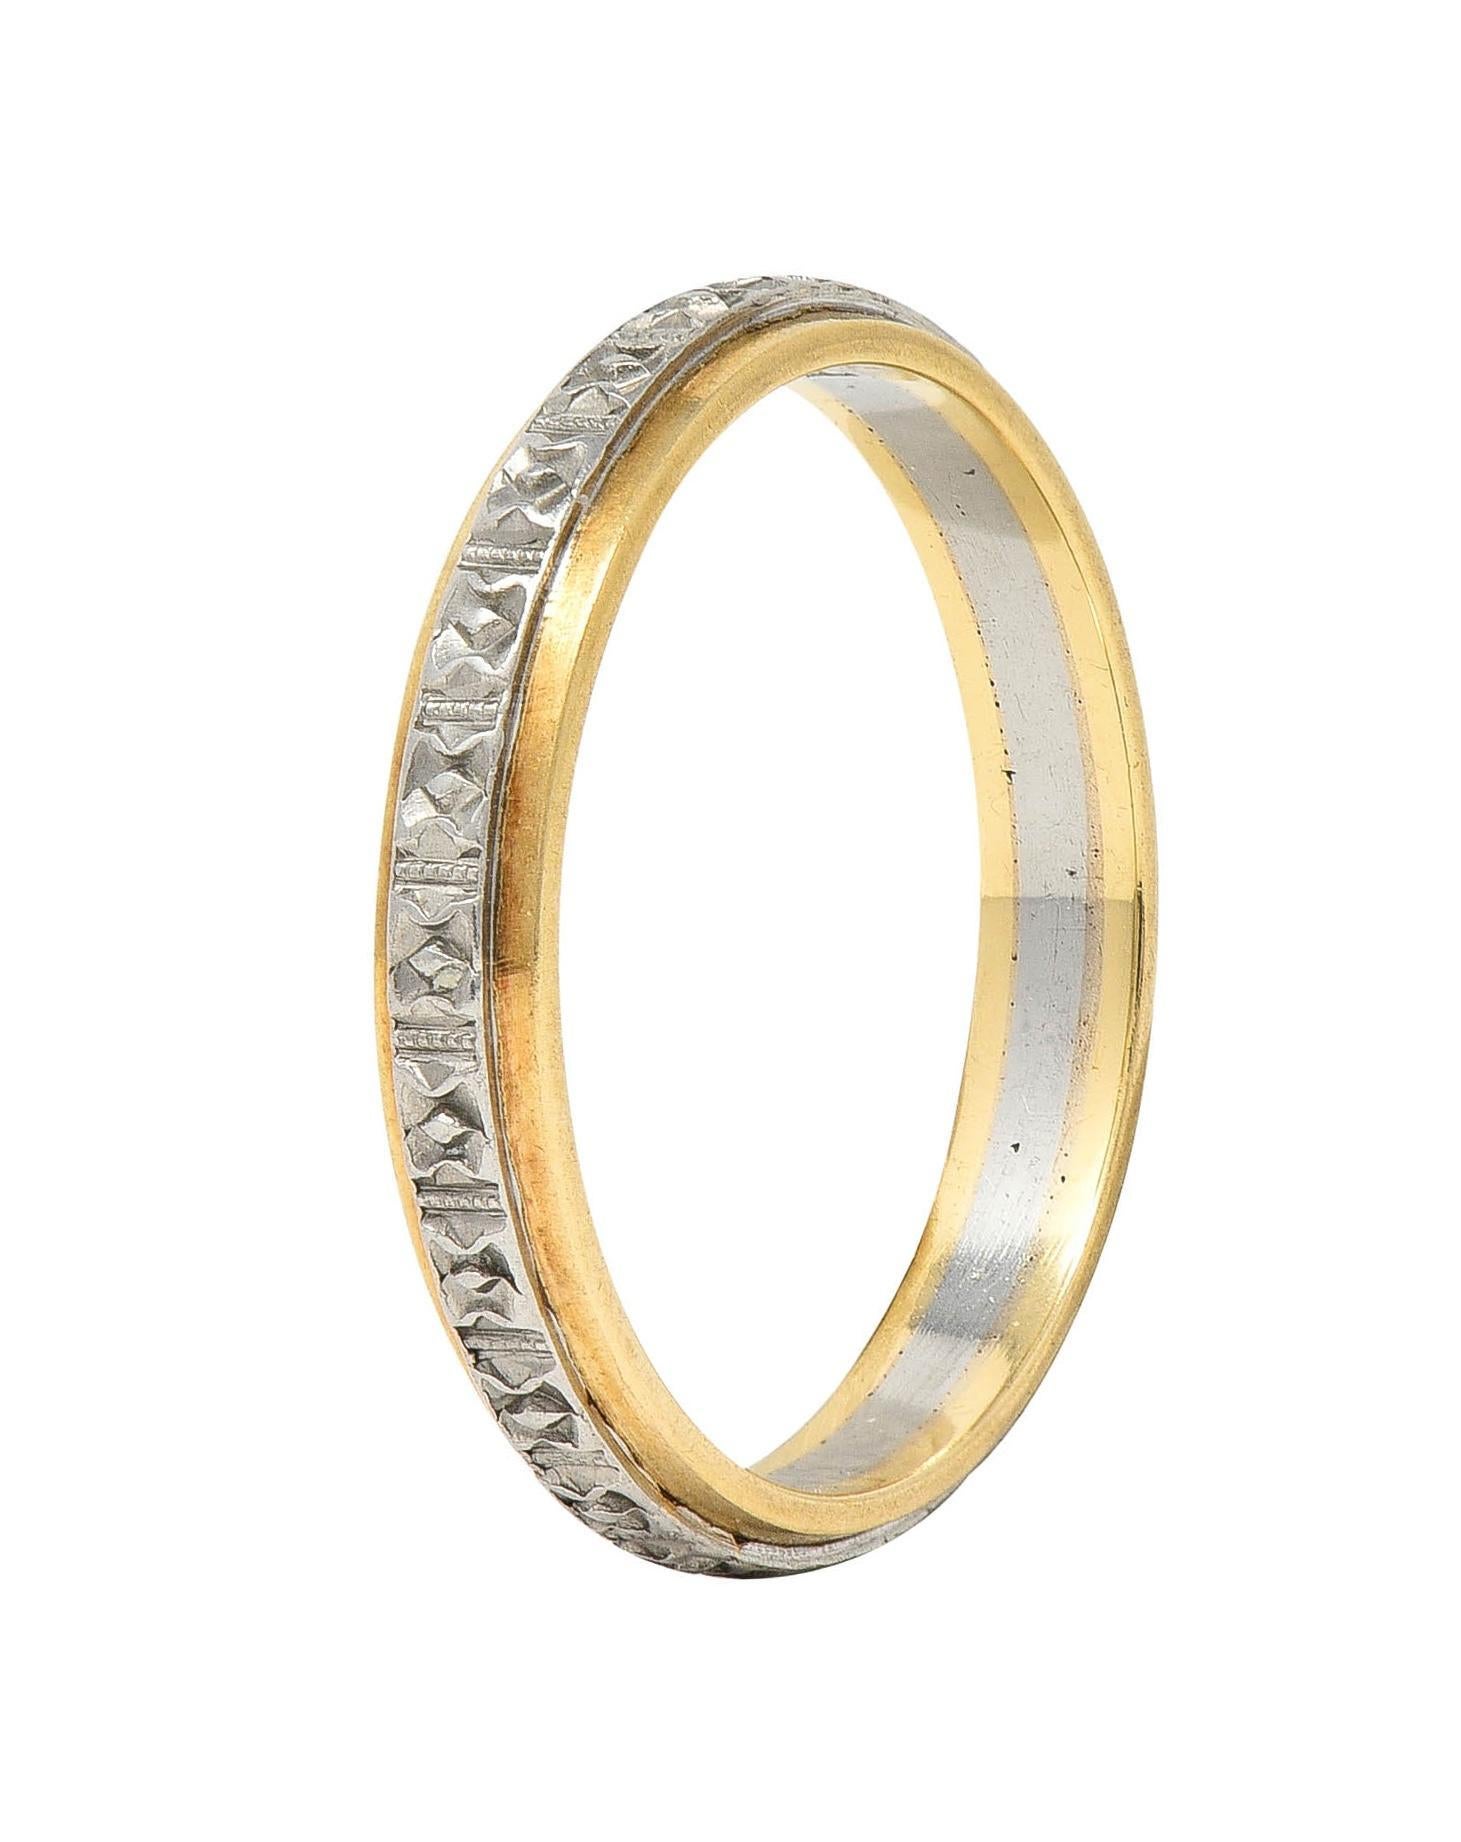 Designed as a raised platinum band with a grooved orange blossom motif fully around 
Centered on a yellow-gold recessed band
With milgrain detail 
Stamped for platinum and 14 karat gold
With maker's mark for Bristol Ring Co.
Circa: 1930s
Ring size: